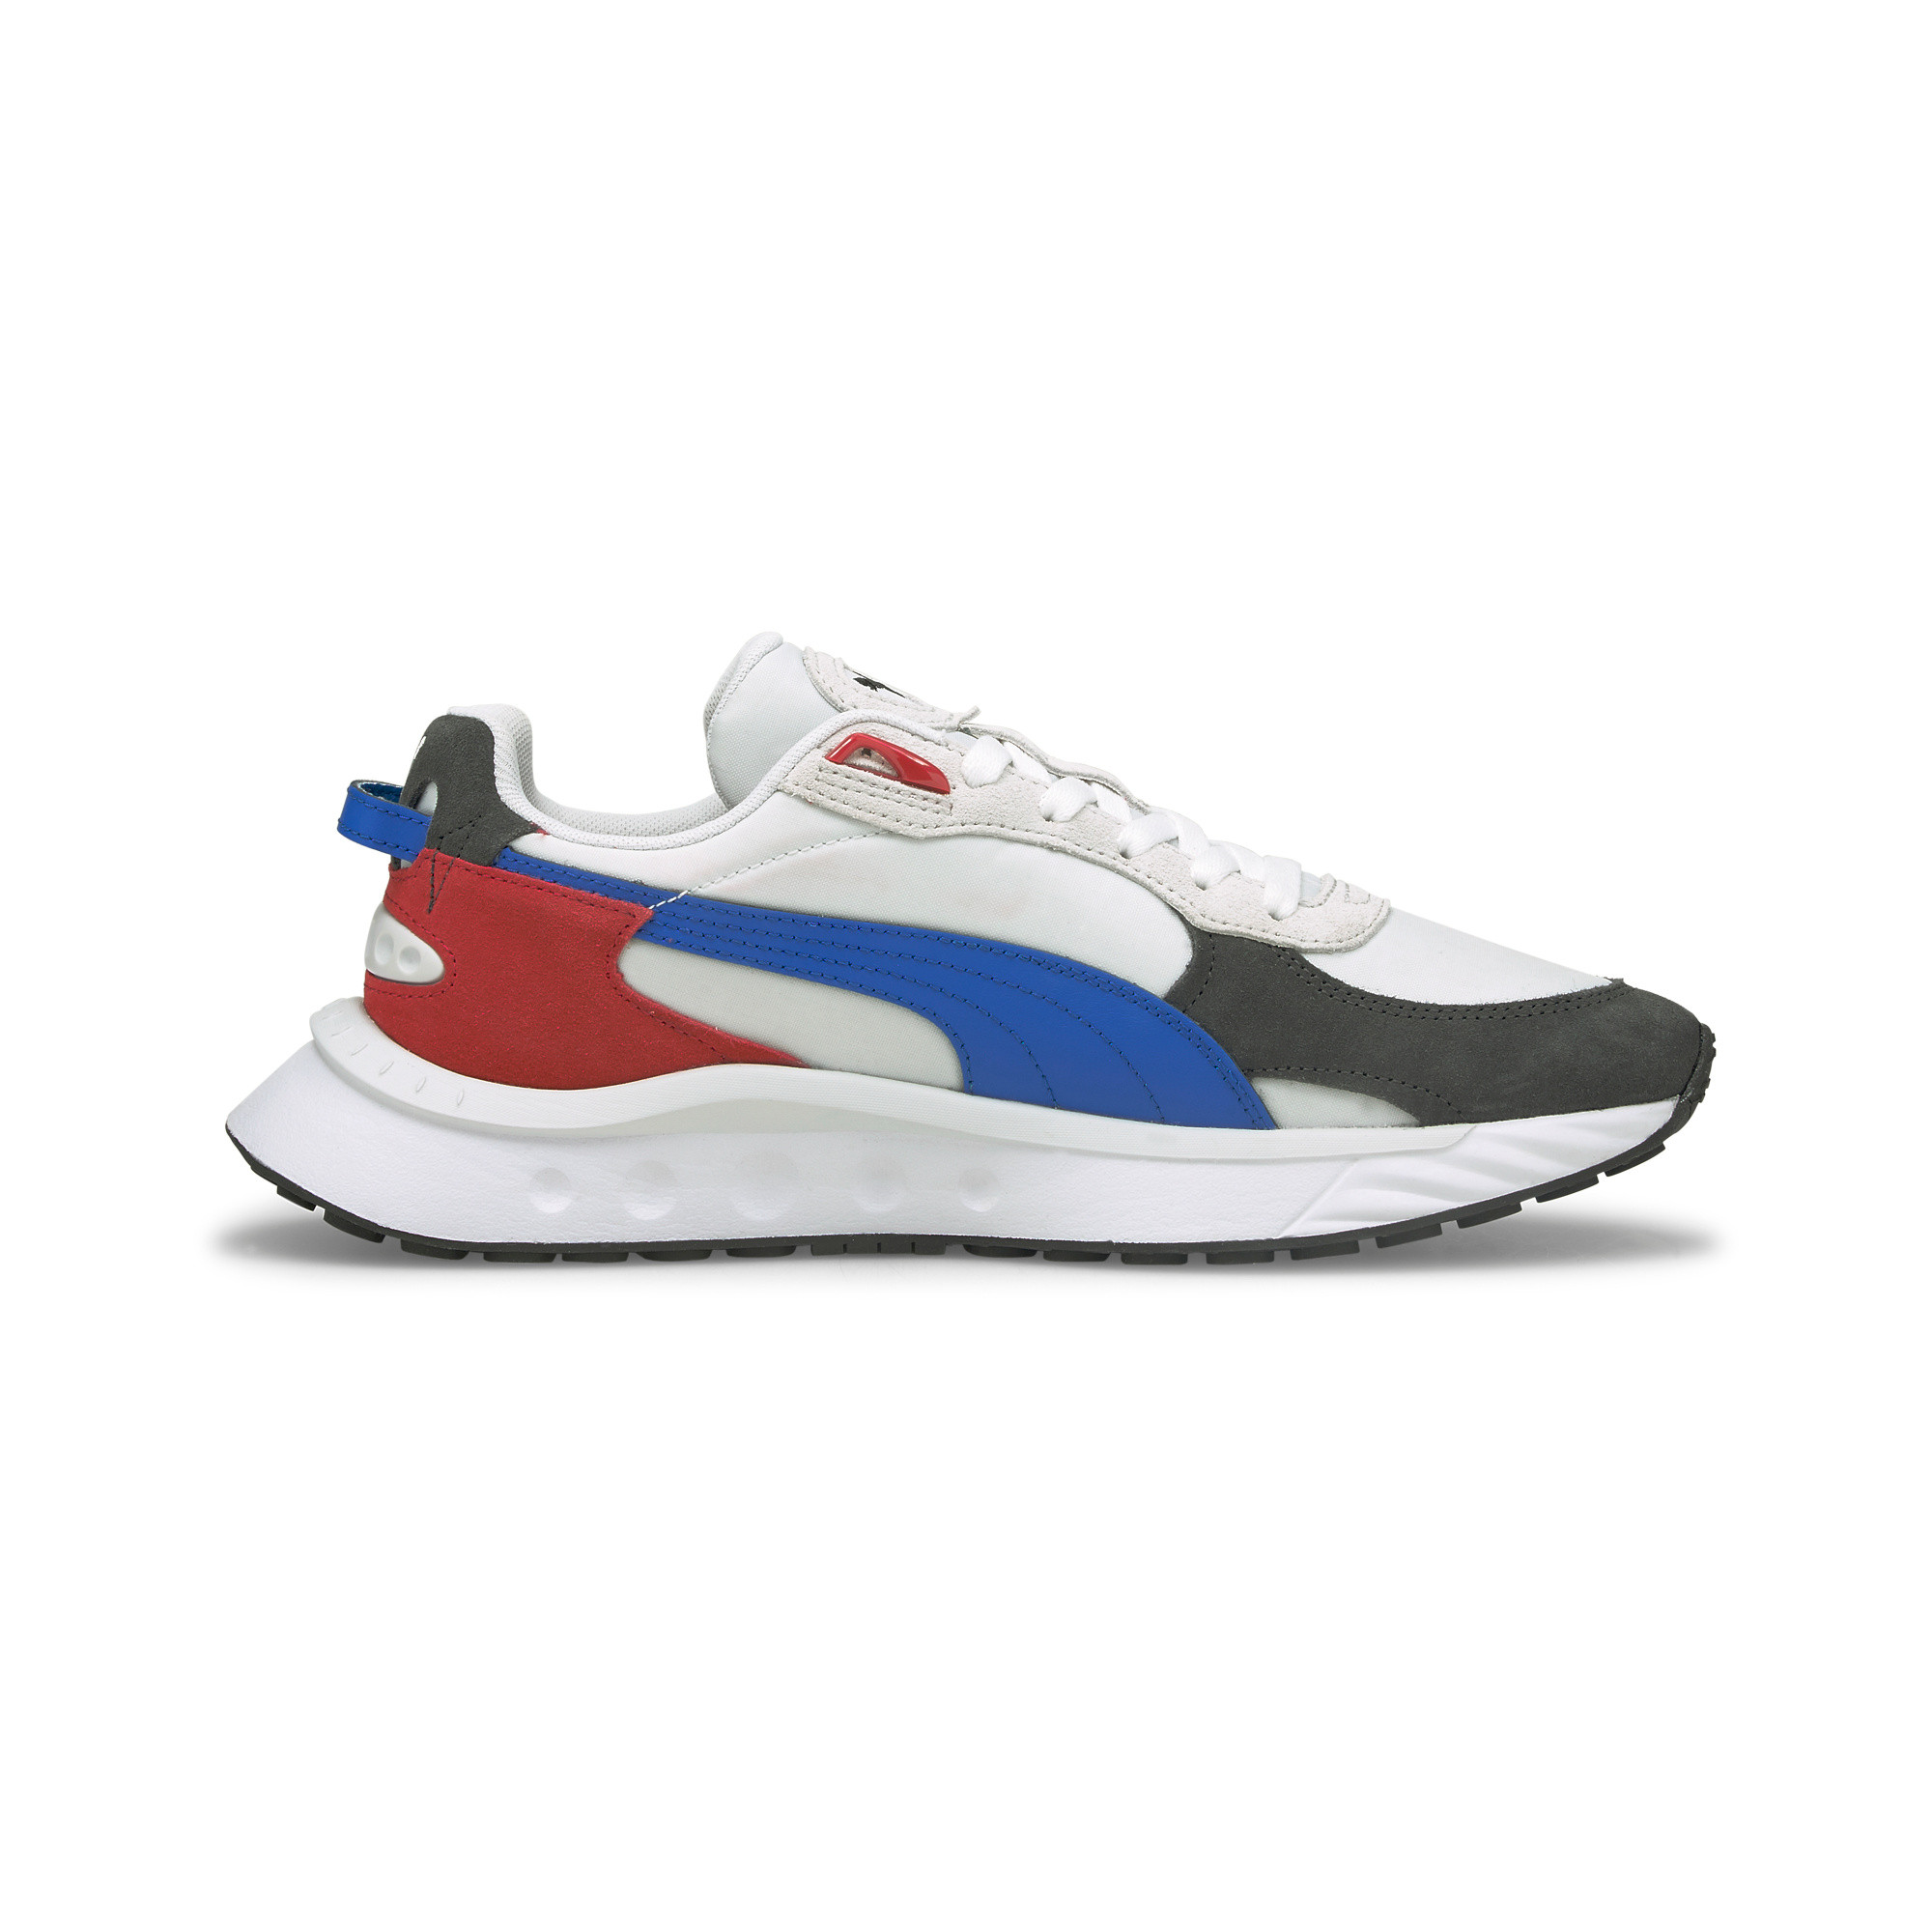 Sneakers PUMA, Bianco, large image number 1